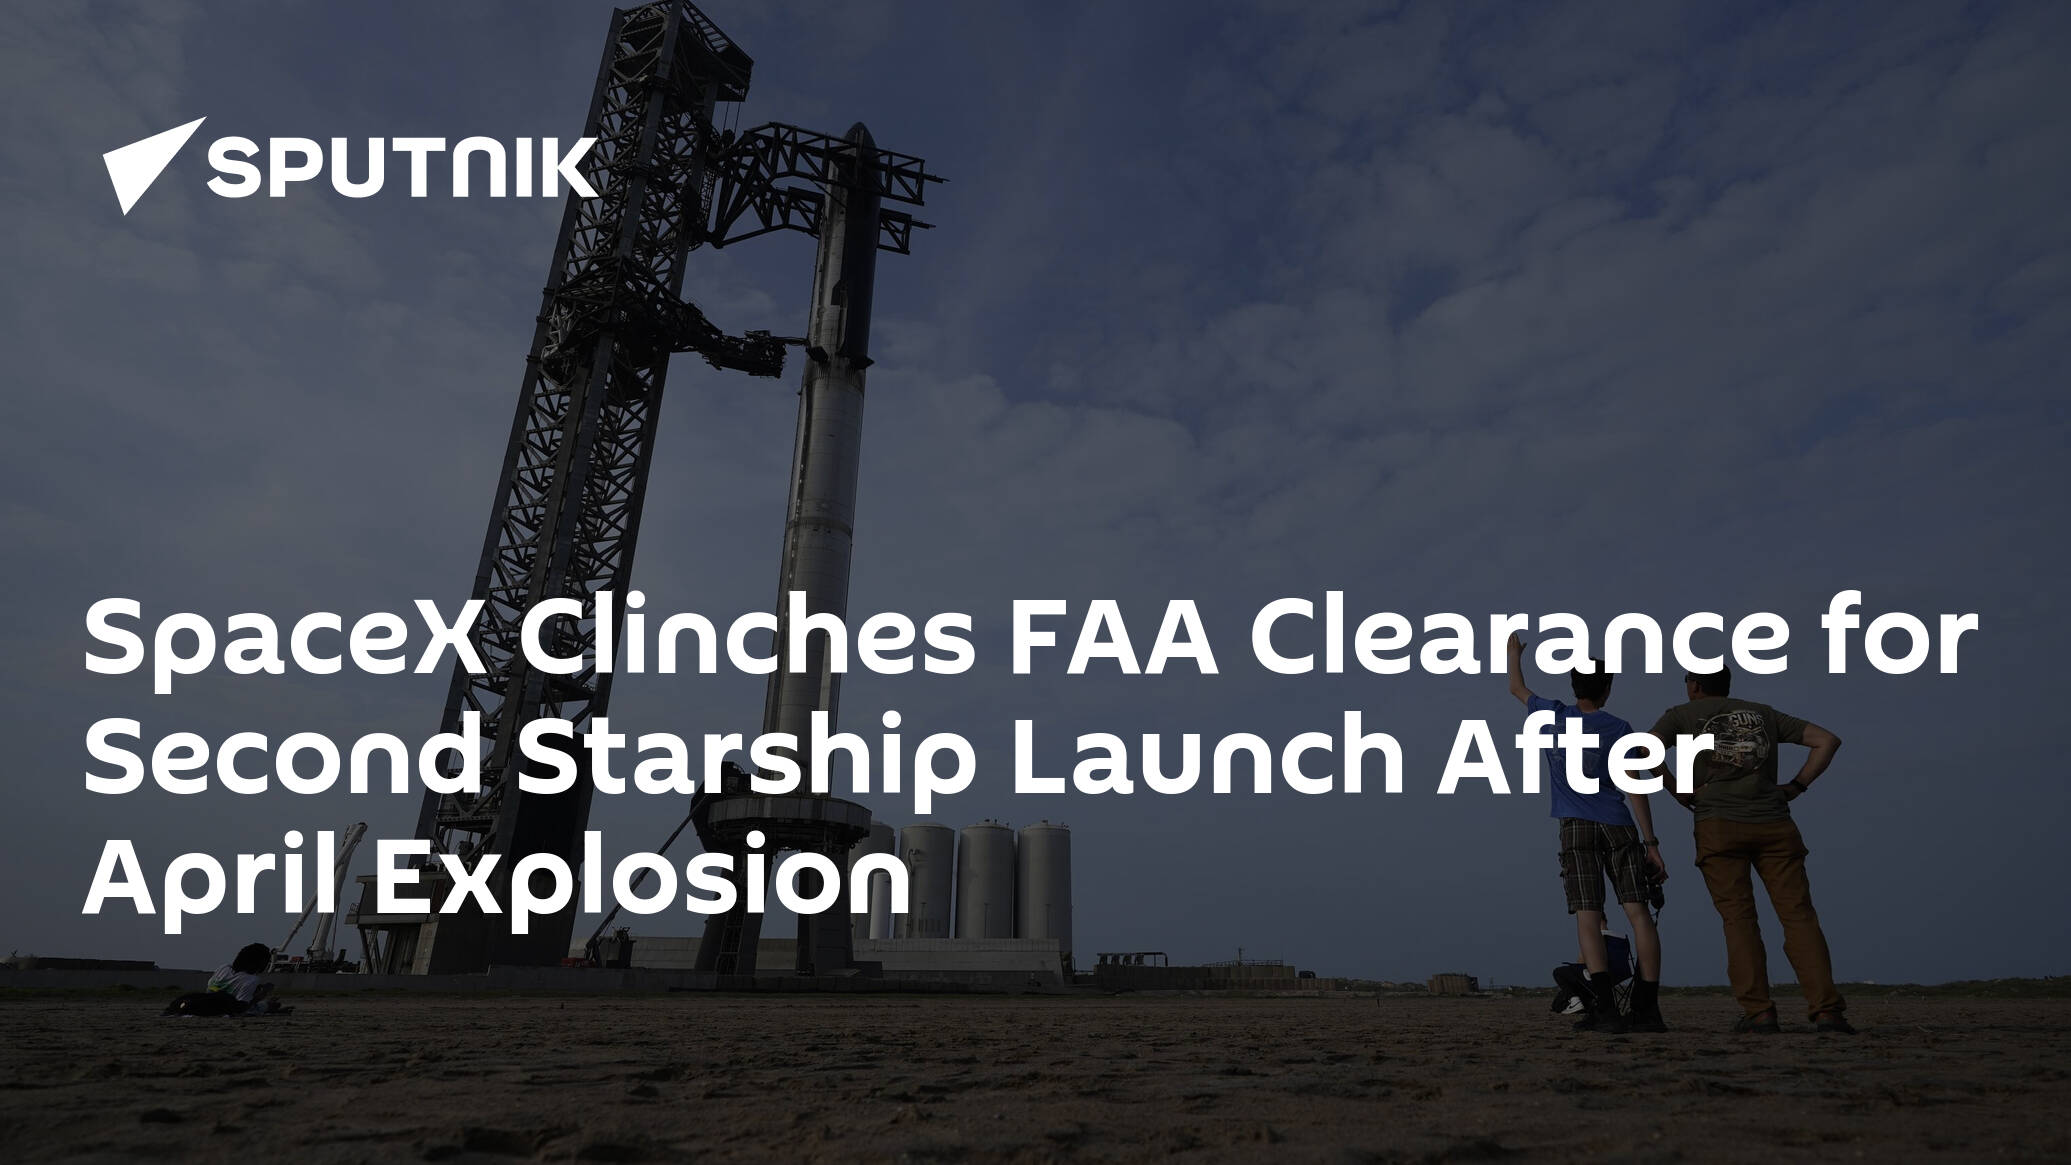 SpaceX Clinches FAA Clearance for Second Starship Launch After April Explosion